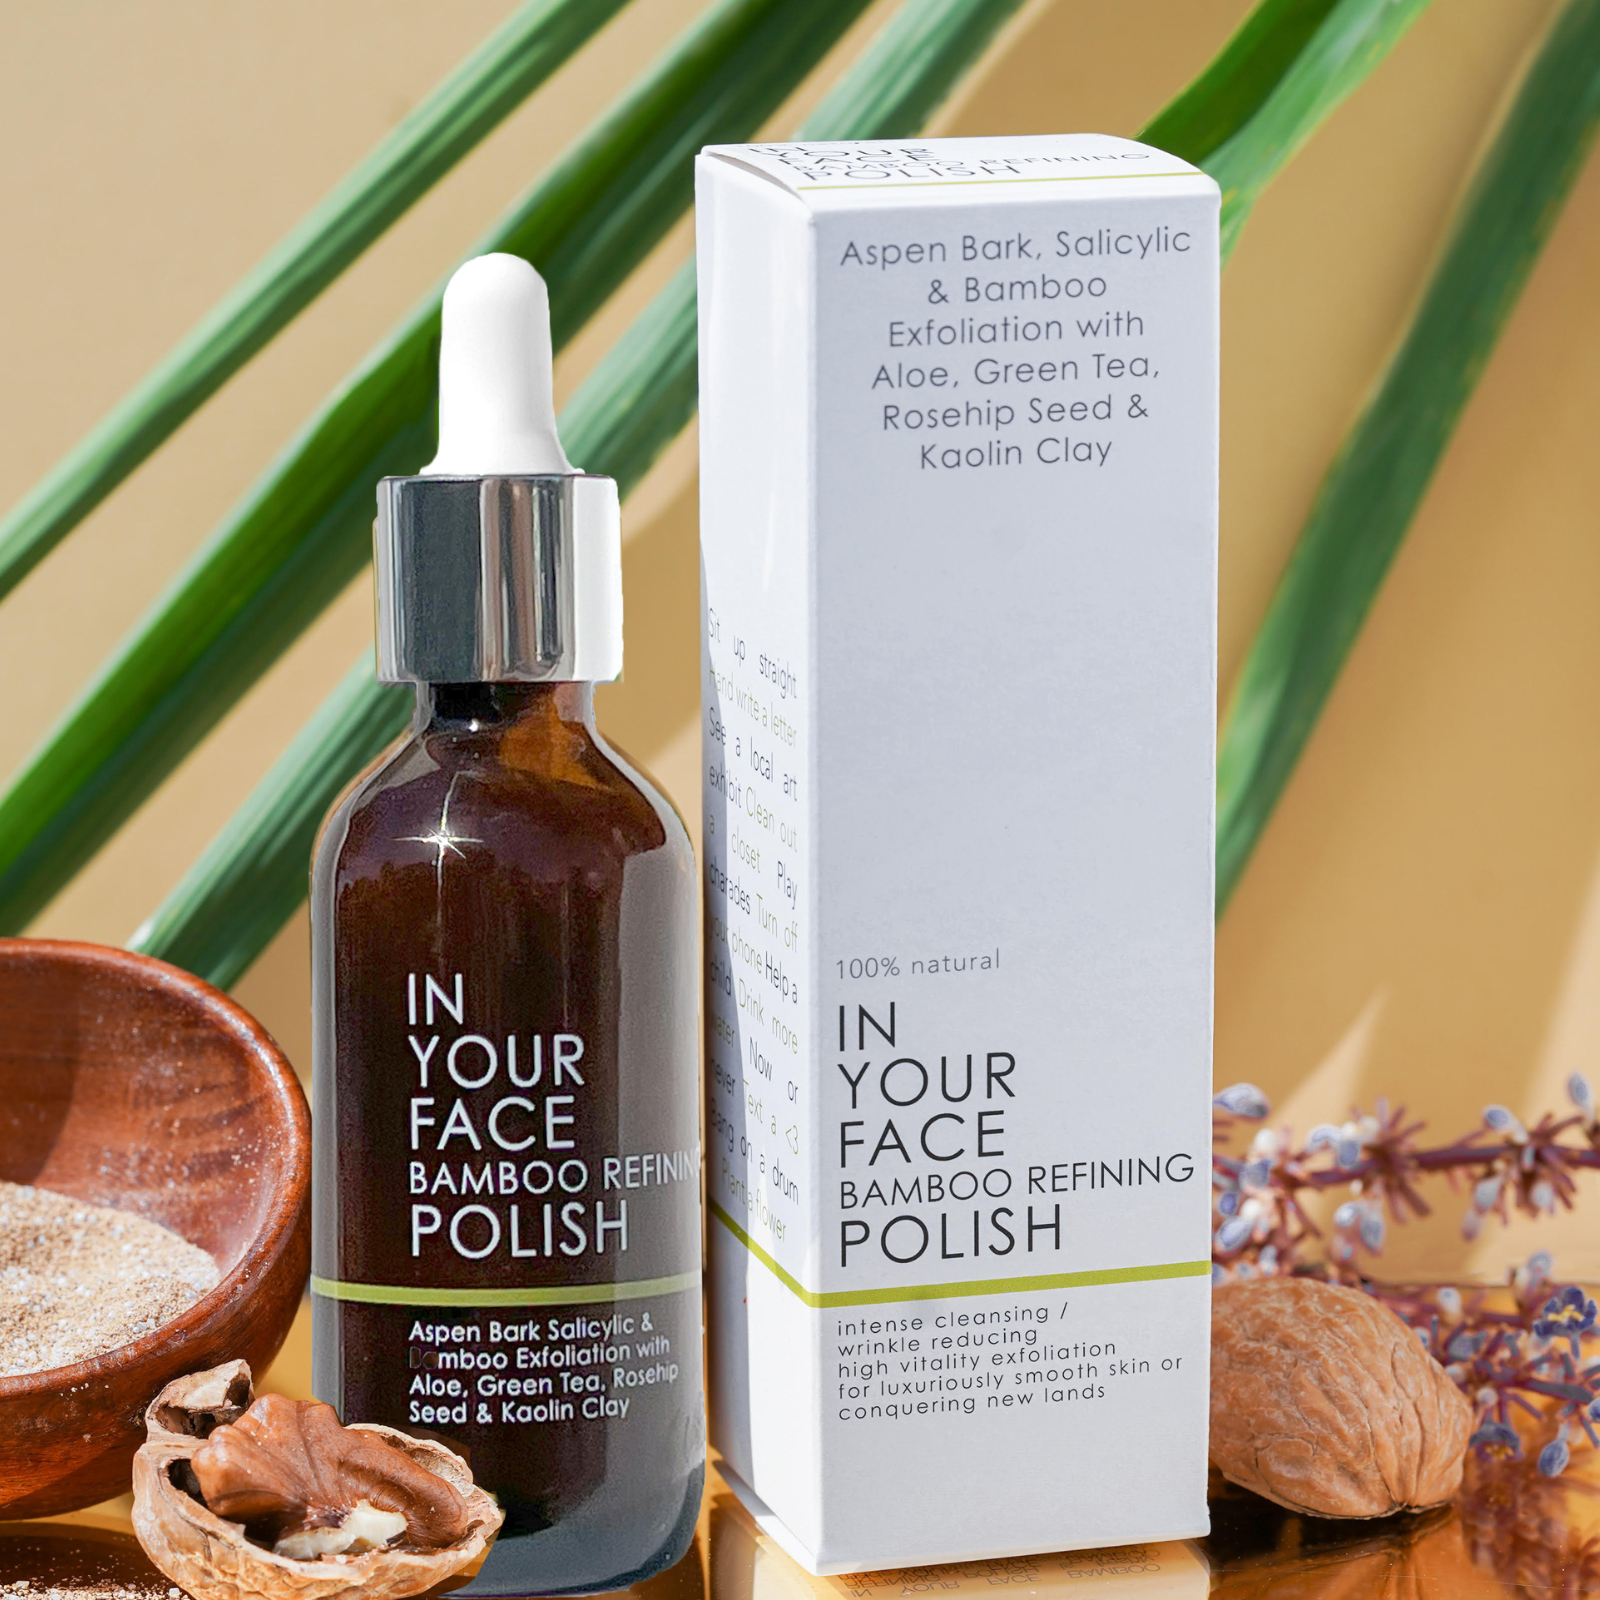 an image of the BAMBOO REFINING POLISH on a white background with a small shadow under it. On the bottle it says "Aspen Bark Salicylic & Bamboo Exfoliation with Aloe, Green Tea, Rosehip Seed & Kaolin Clay". The bottle is a dark brown opaque color. It's next to the box of the POLISH. The box says at the bottom: "100% natural IN YOUR FACE BAMBOO REFINING POLISH. Intense cleansing / wrinkle reducing, high vitaity exfoliation for luxuriously smooth skin or conquering new lands".